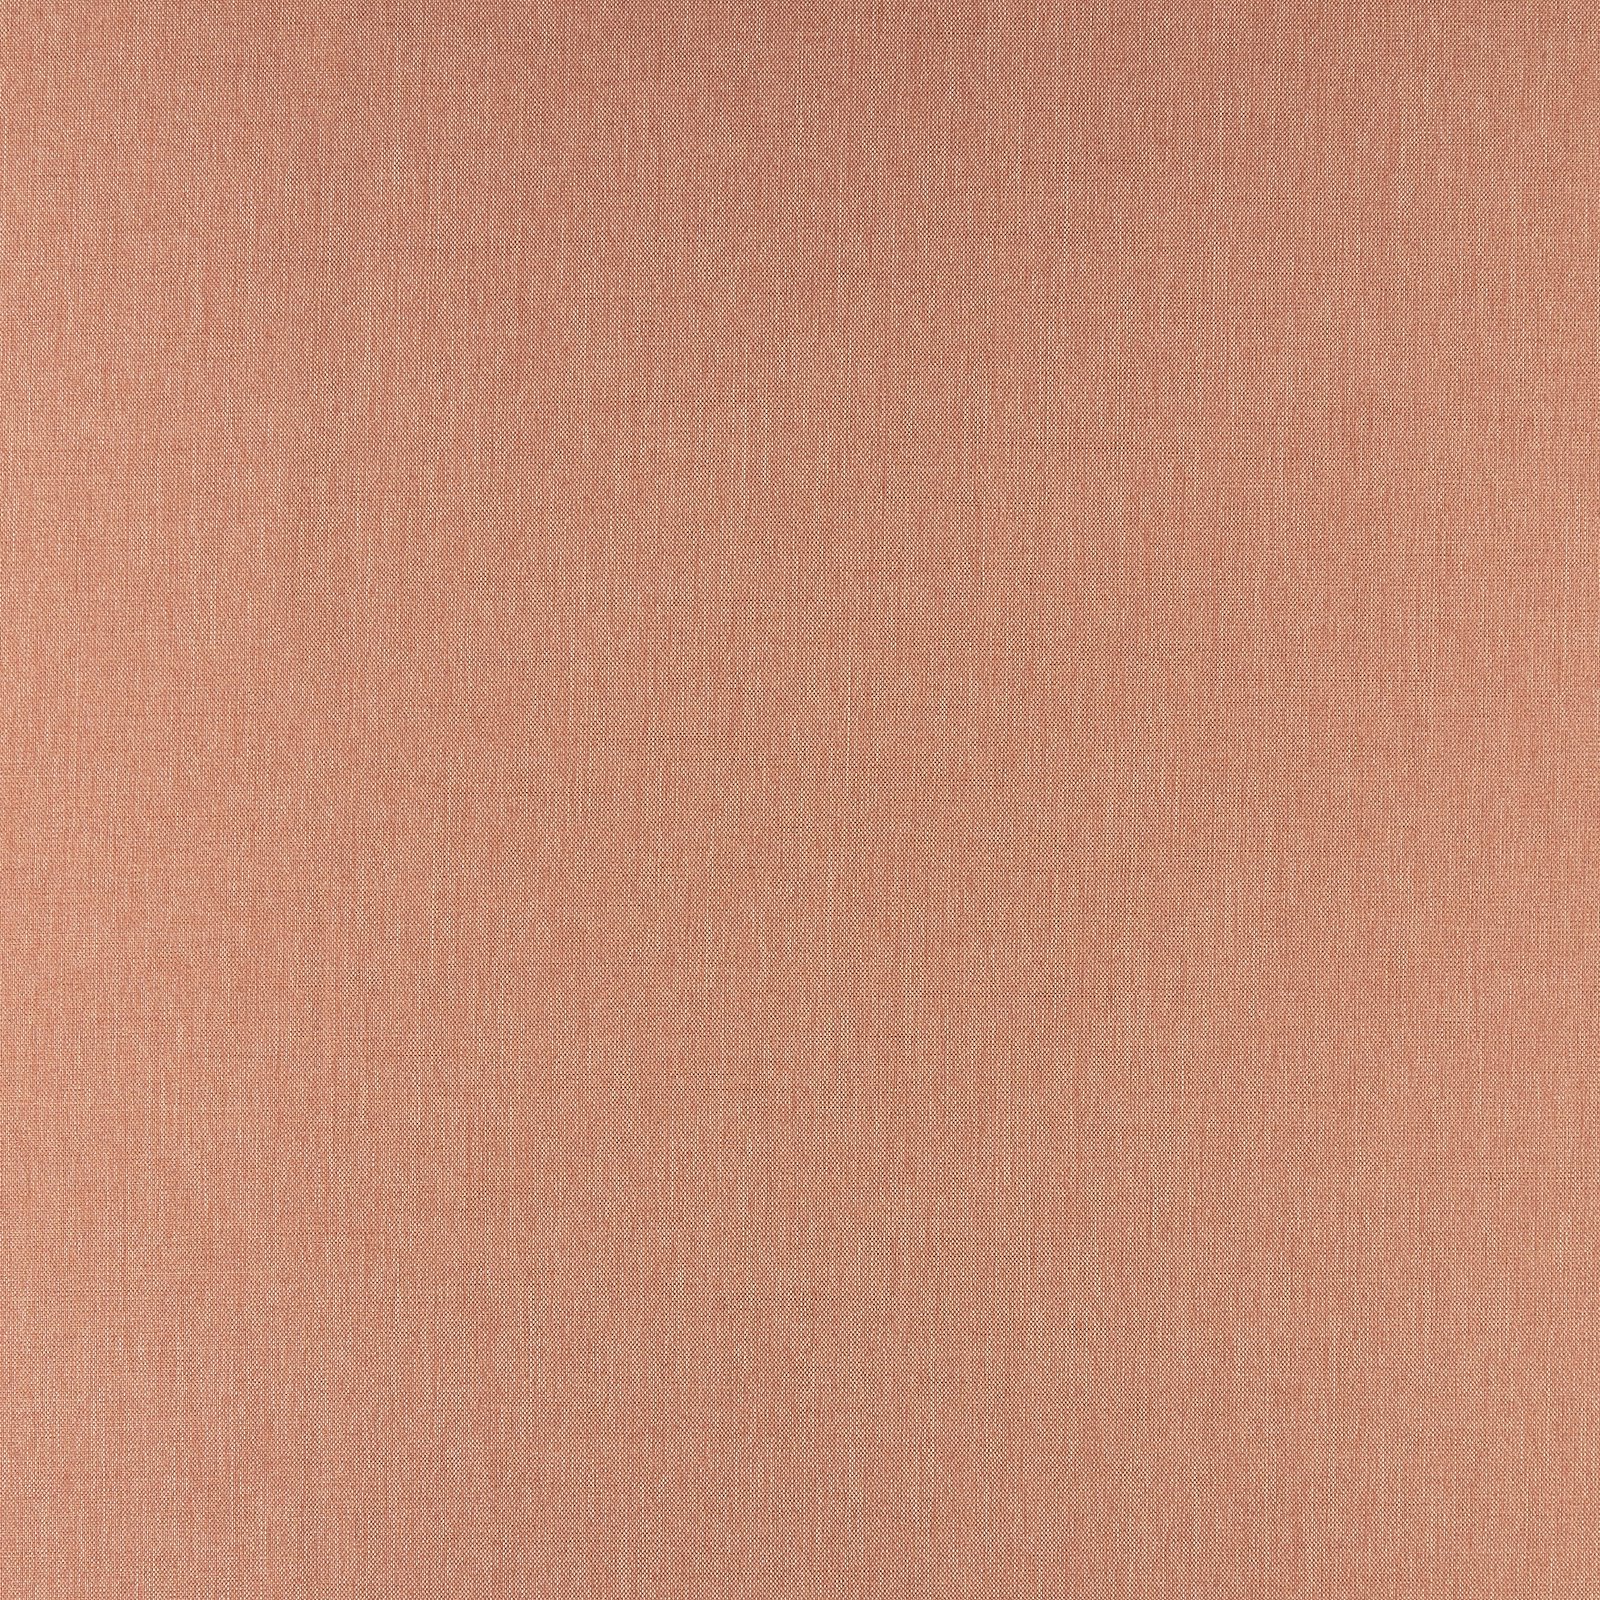 Upholstery fabric dusty peach melange 826579_pack_solid